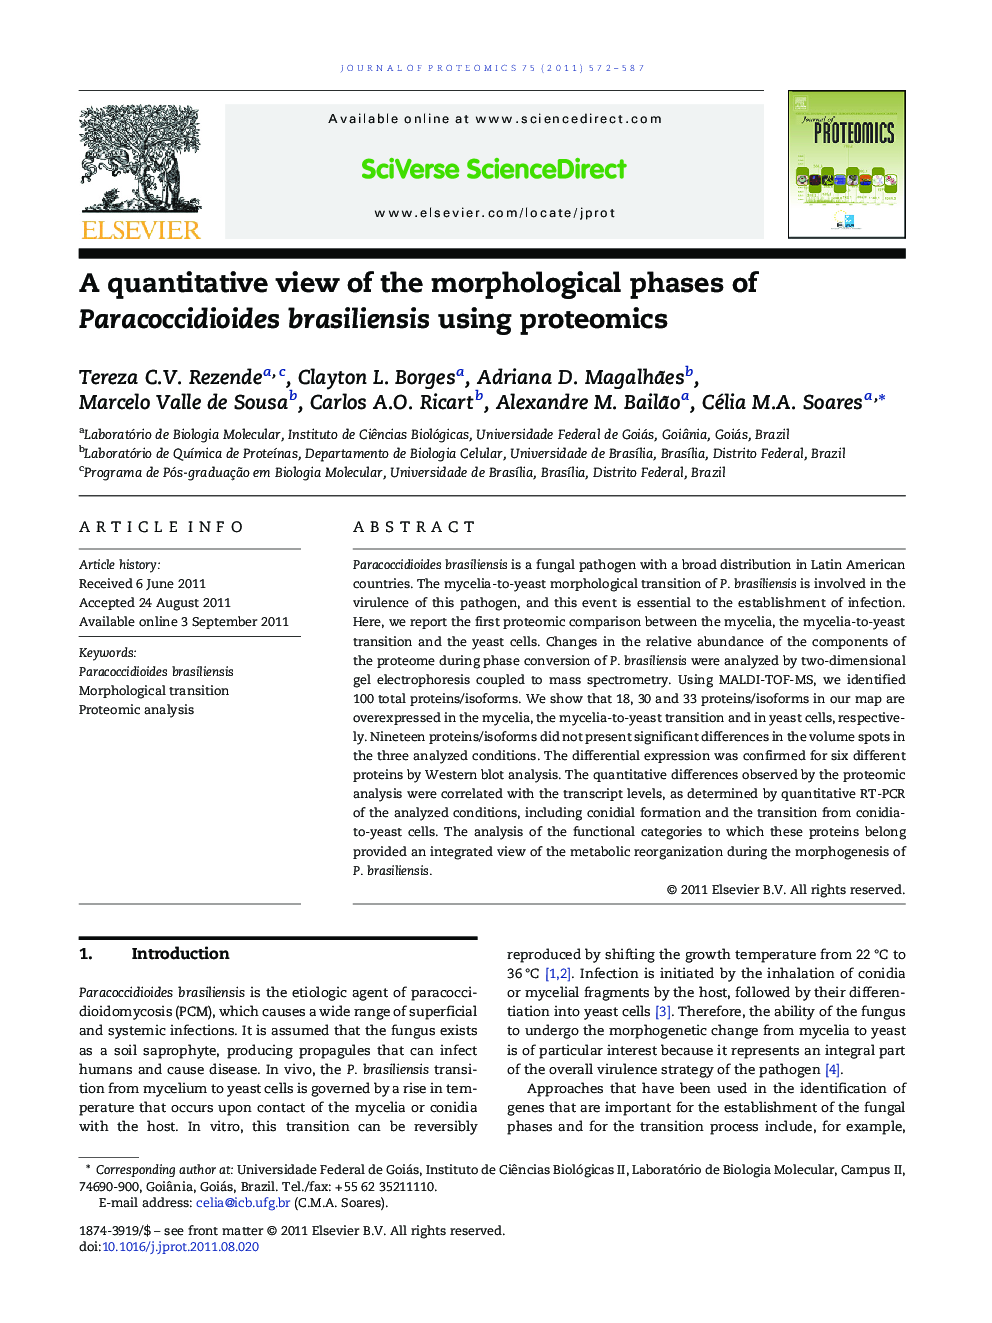 A quantitative view of the morphological phases of Paracoccidioides brasiliensis using proteomics